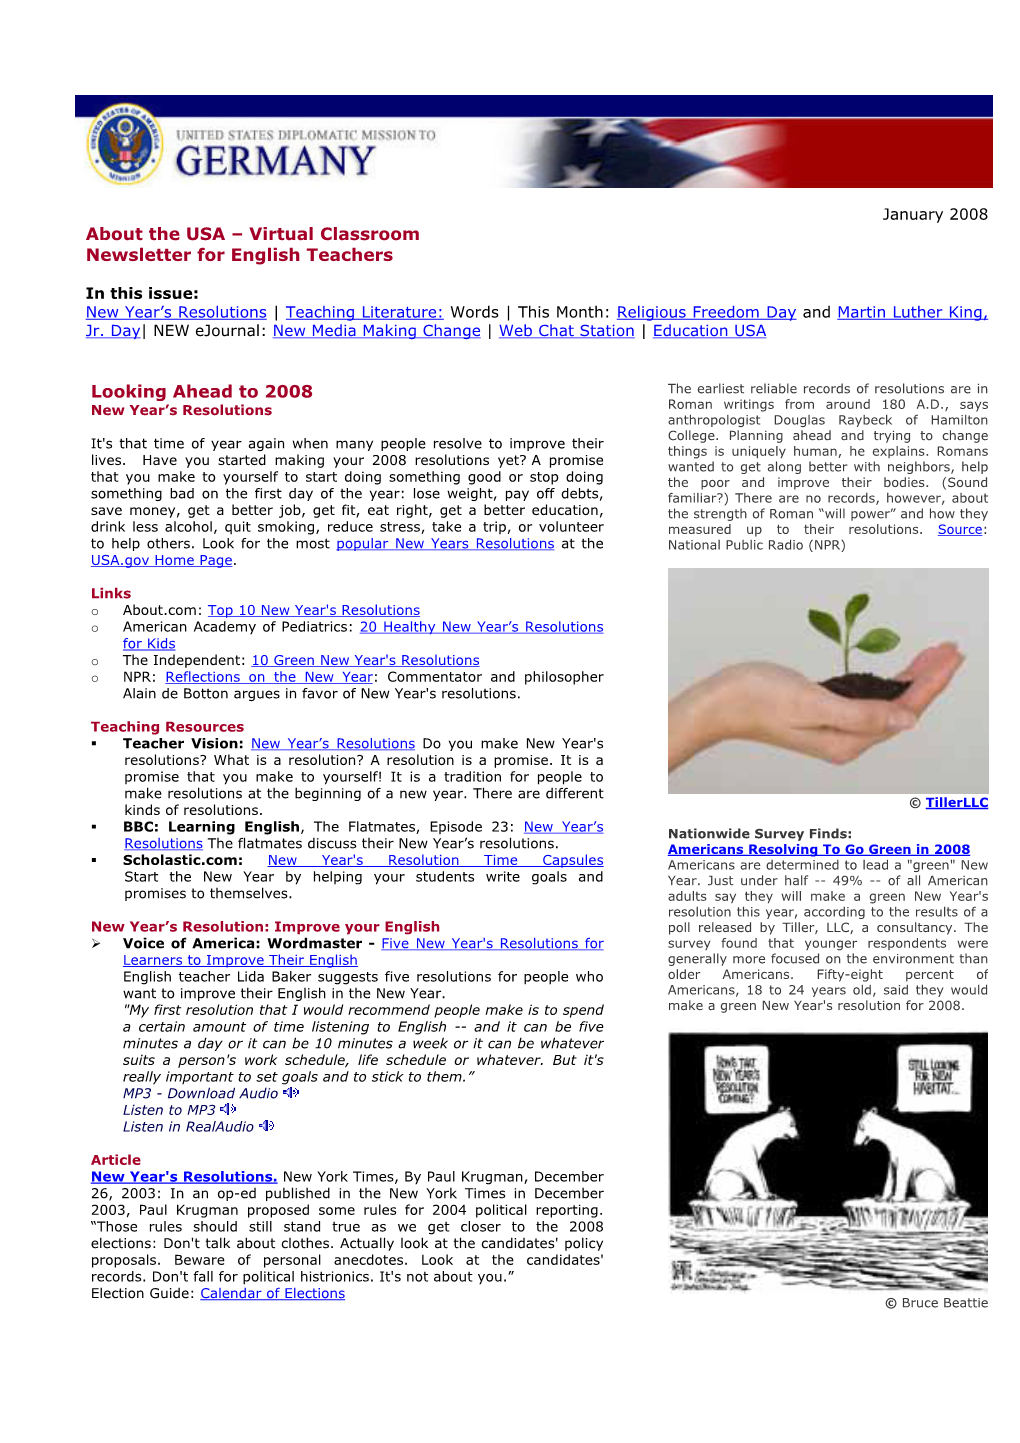 Virtual Classroom Newsletter for English Teachers Looking Ahead To